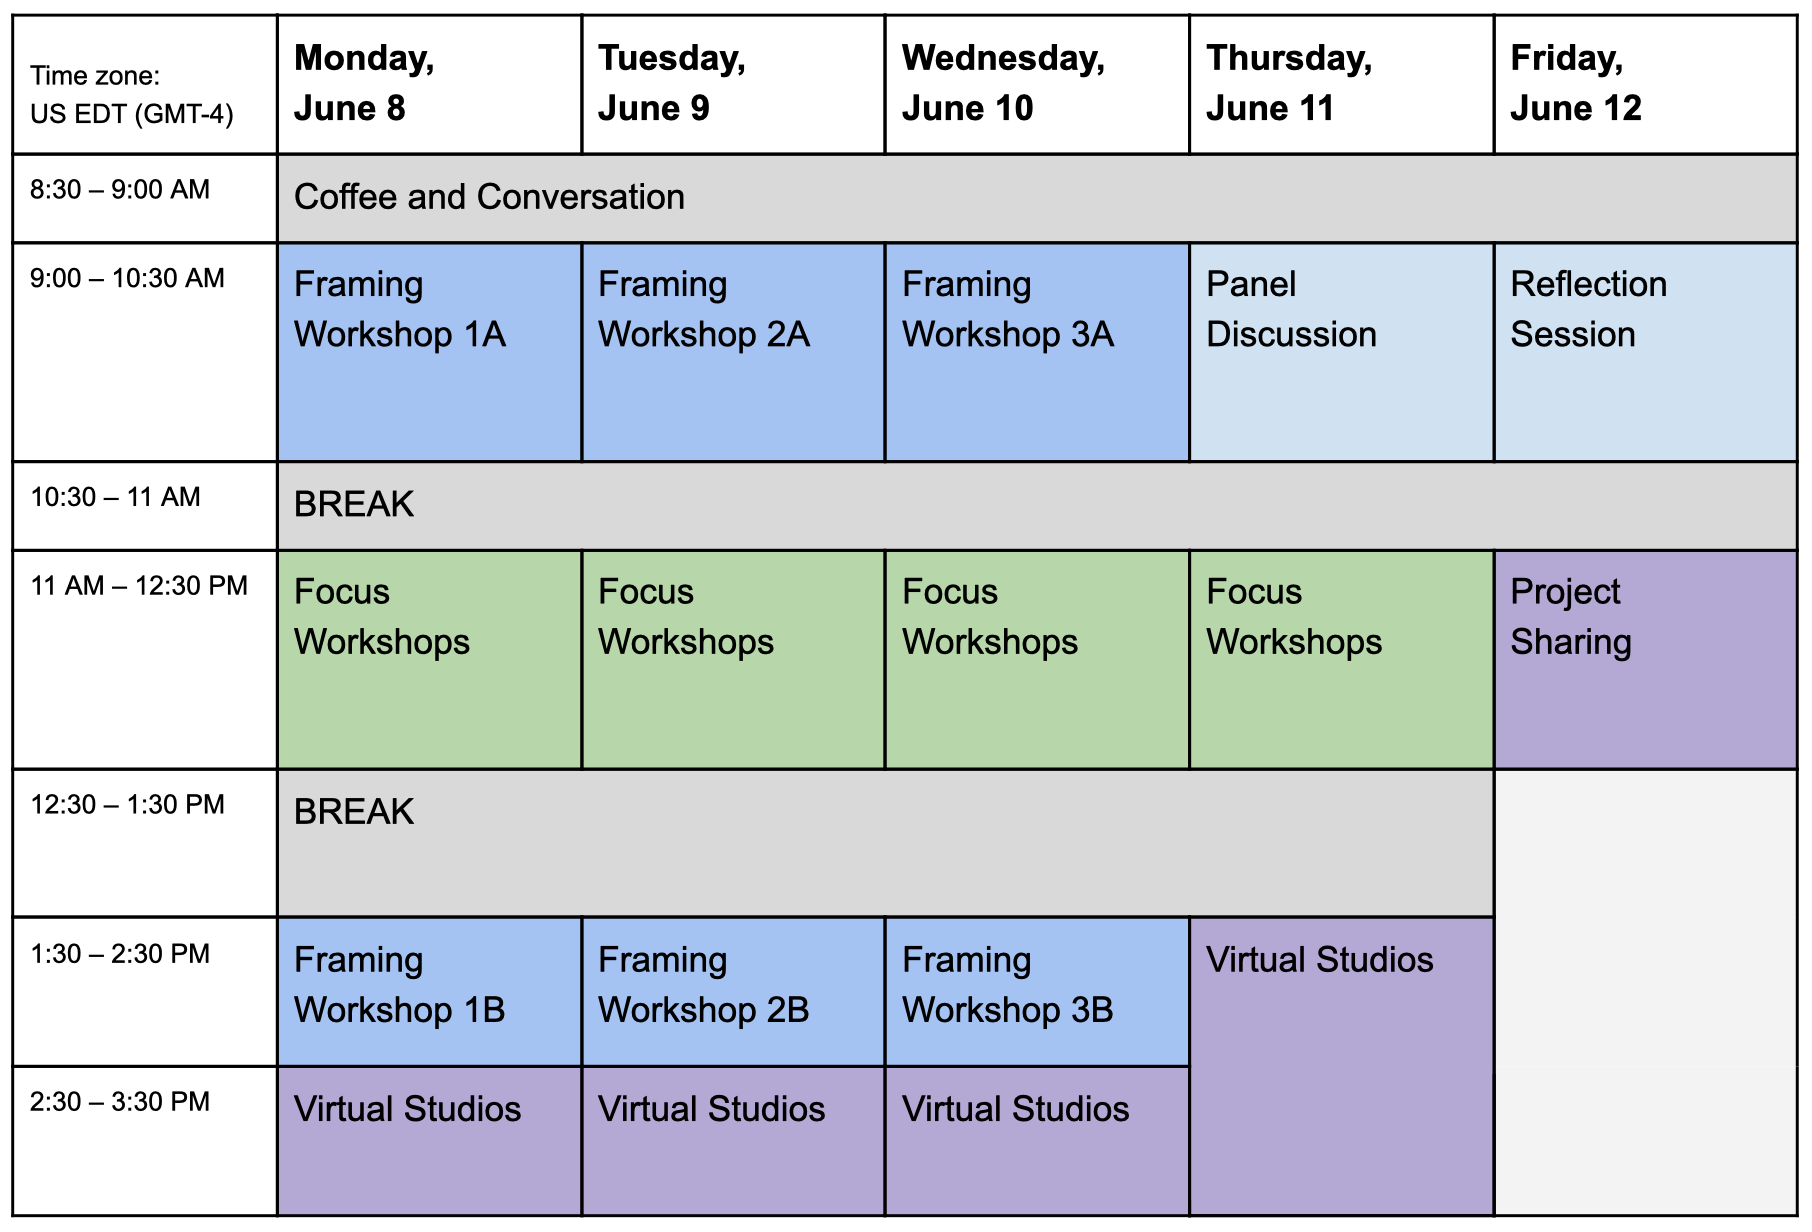 vsi2020_schedule_overview.png